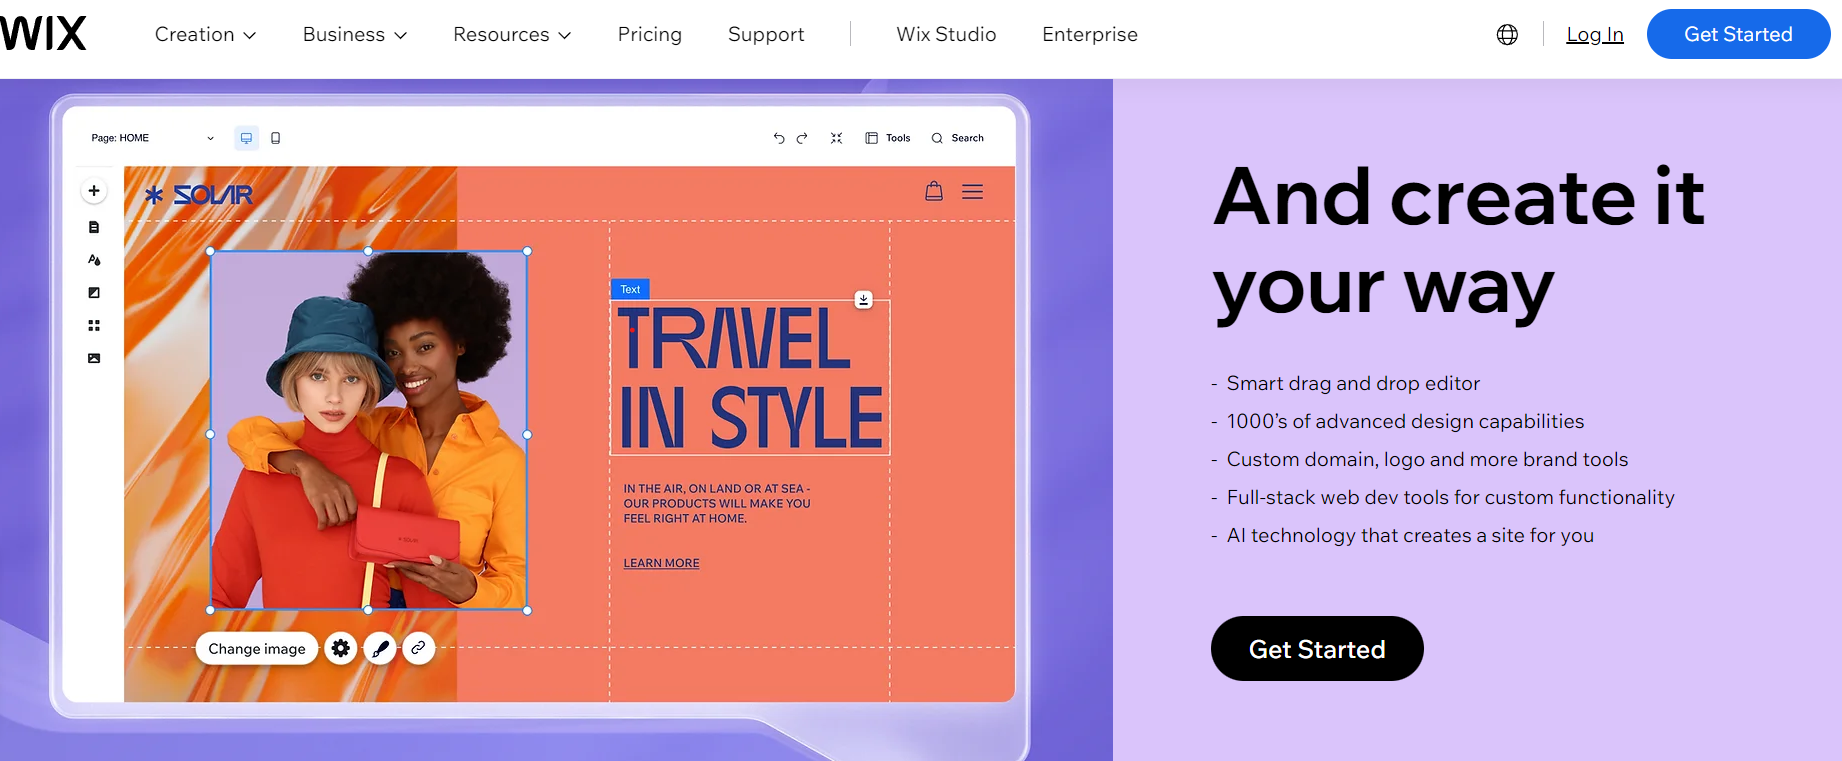 Best Landing Page Tools - Wix